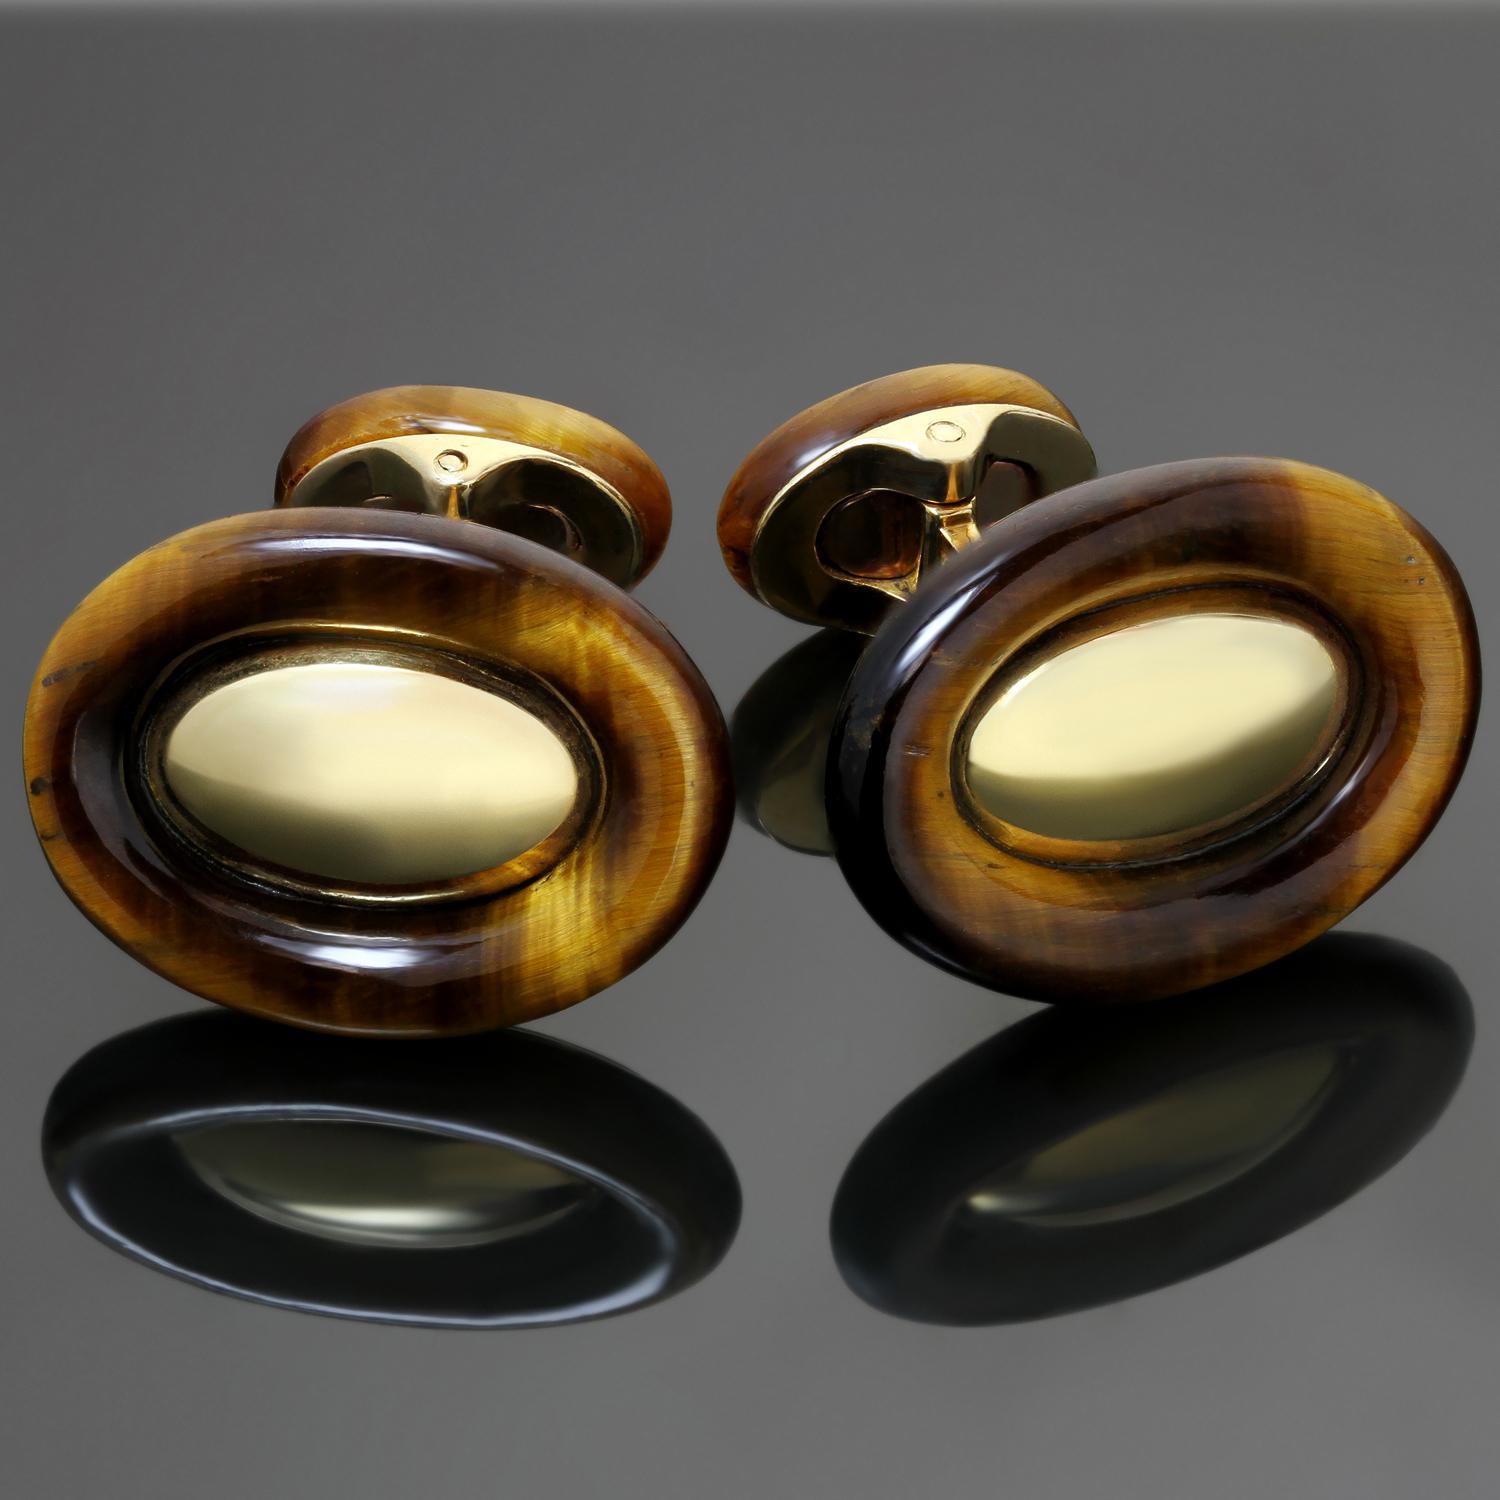 These vintage Van Cleef & Arpels cufflinks features a chic oval design crafted in 18k yellow gold and set with tiger eye stones. Made in France circa 1970s. Measurements: 0.66